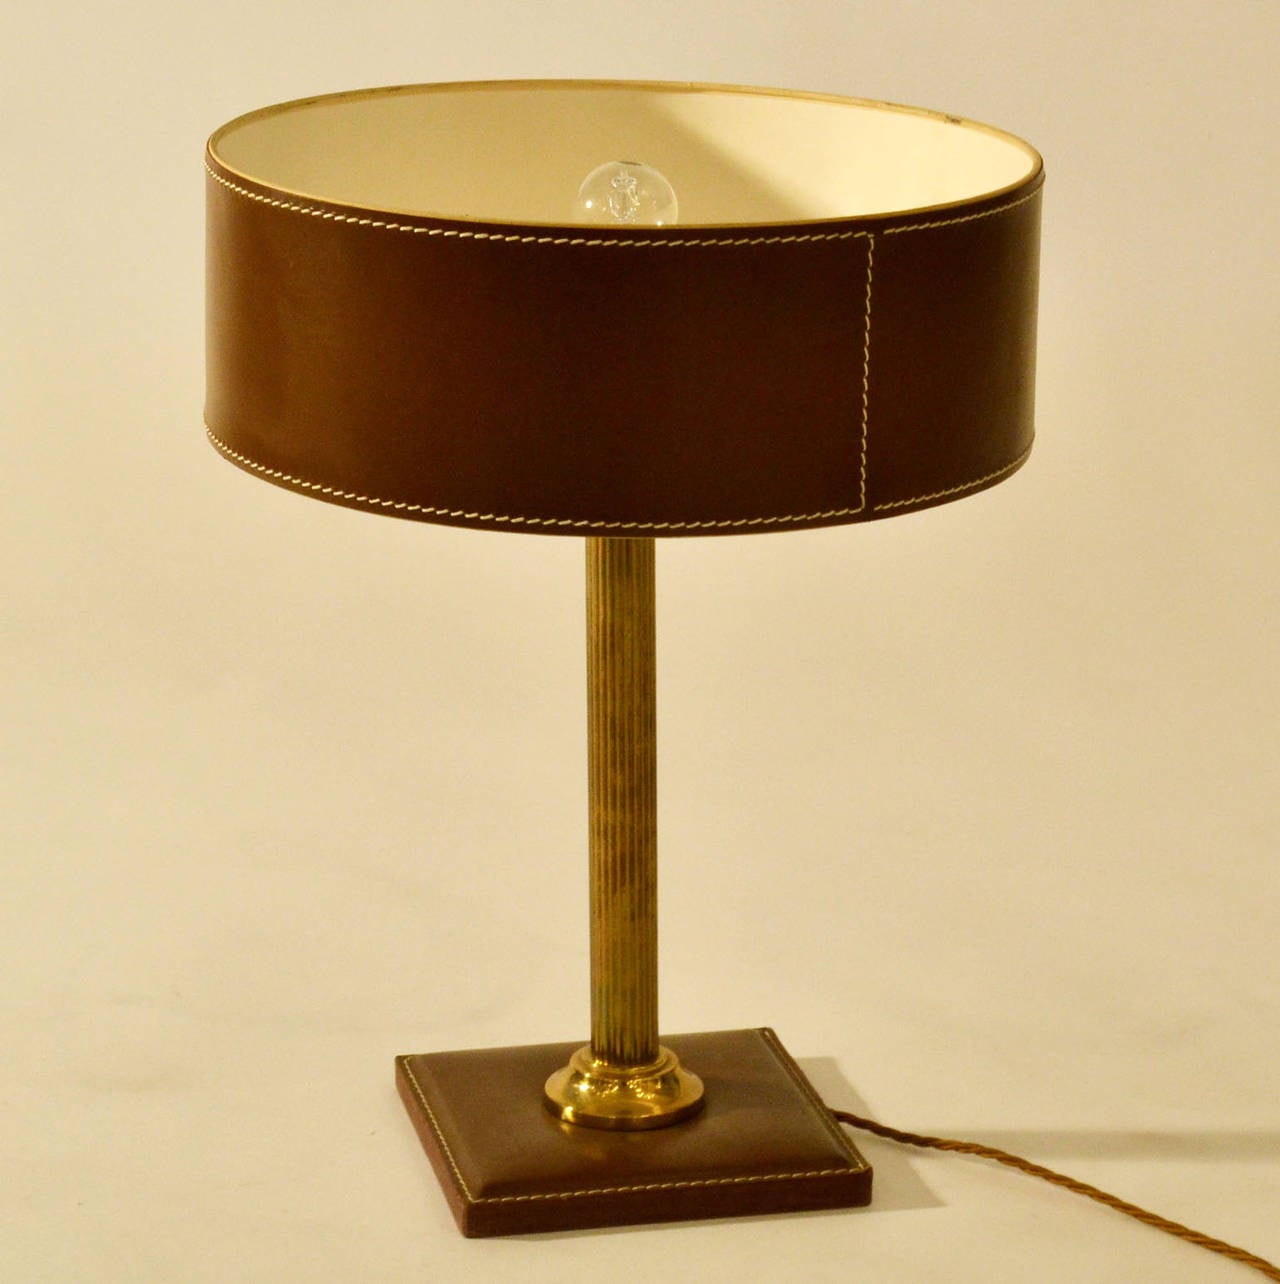 Hazel nut brown leather cladded table lamp with a round shade and square base with detailed contrasting stitching on a brass stem.